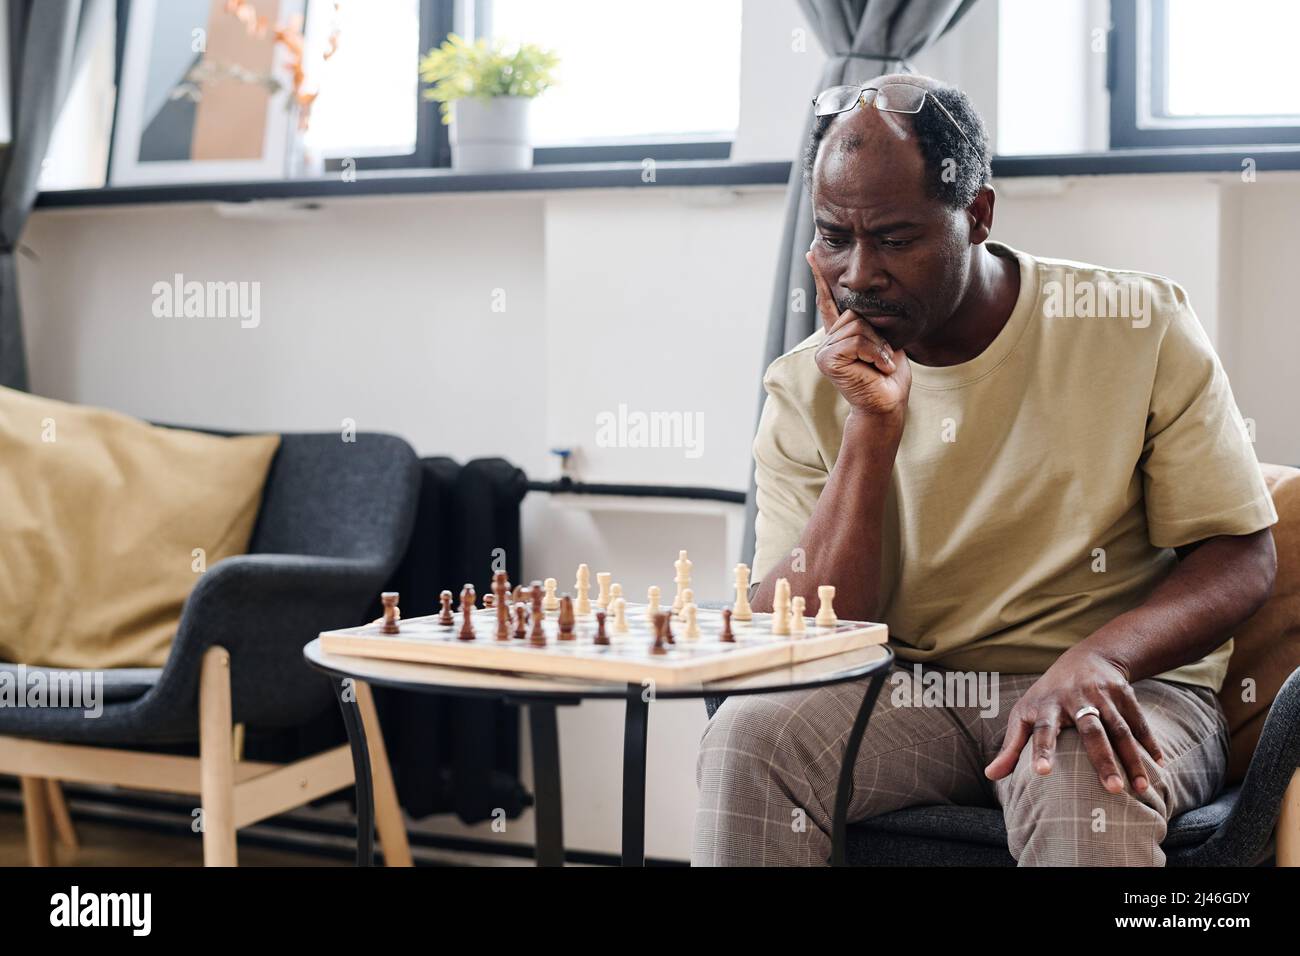 A Man Is Playing Chess Thinking About The Next Move Stock Photo - Download  Image Now - iStock